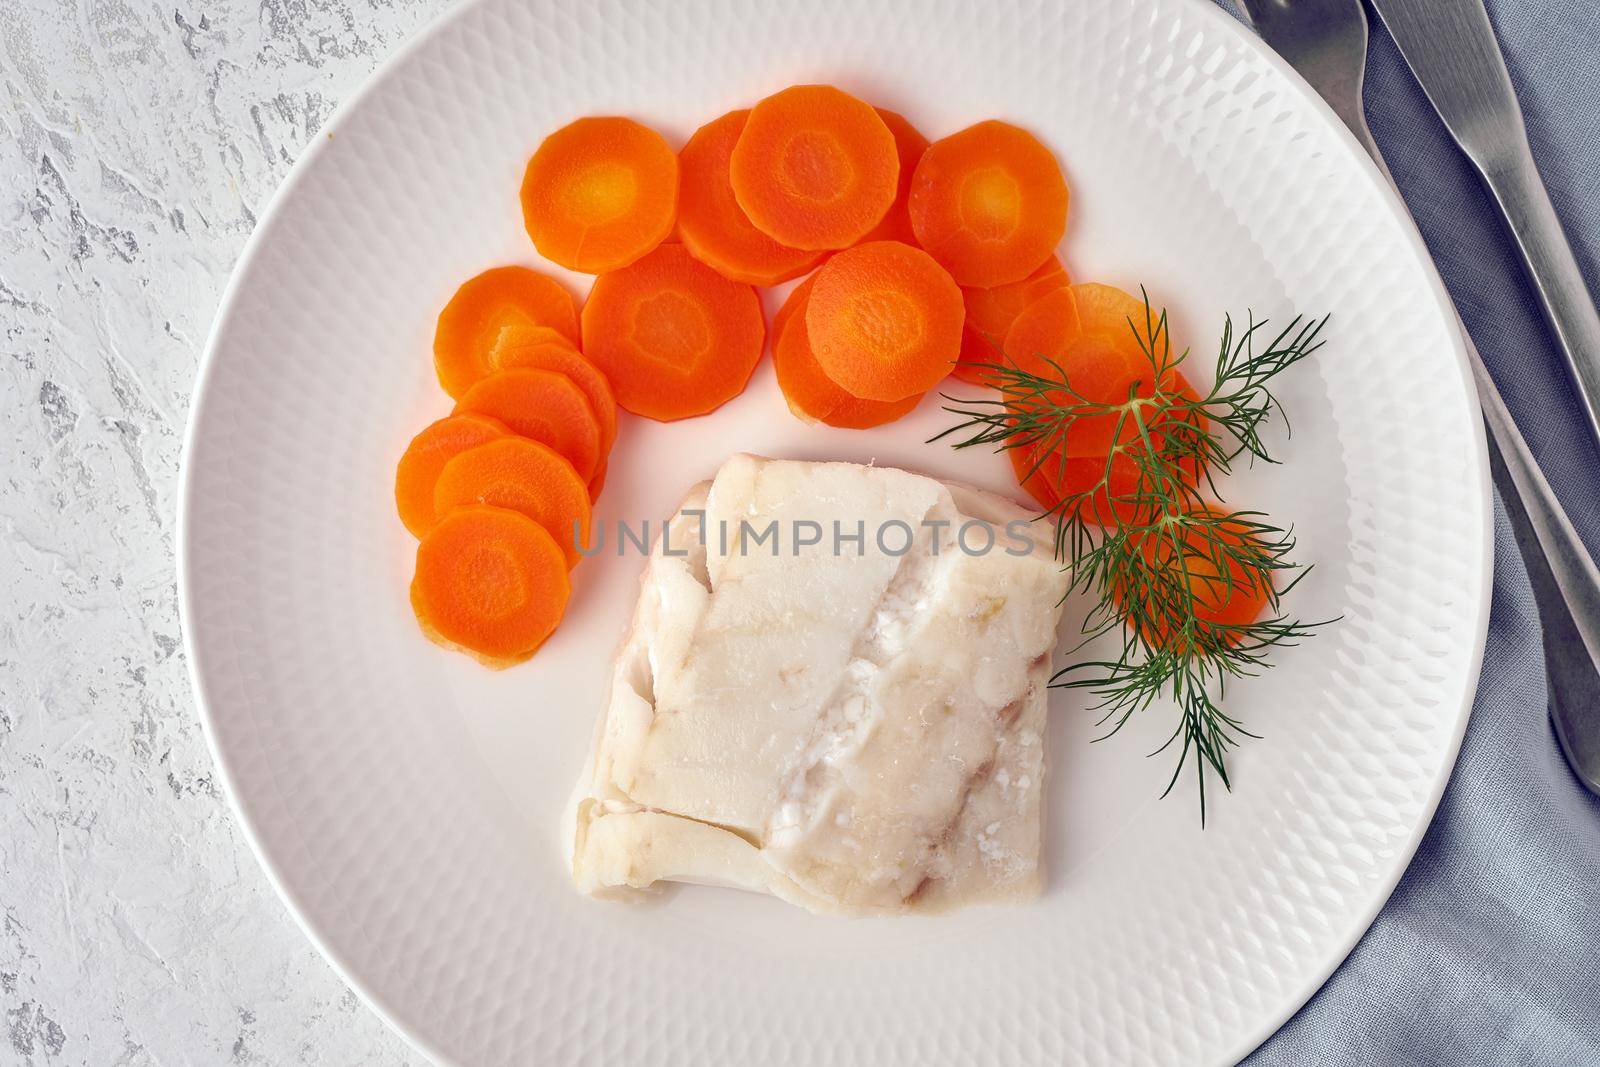 Boiled codfish with carrot and dill on white plate, fodmap dash paleo diet by NataBene